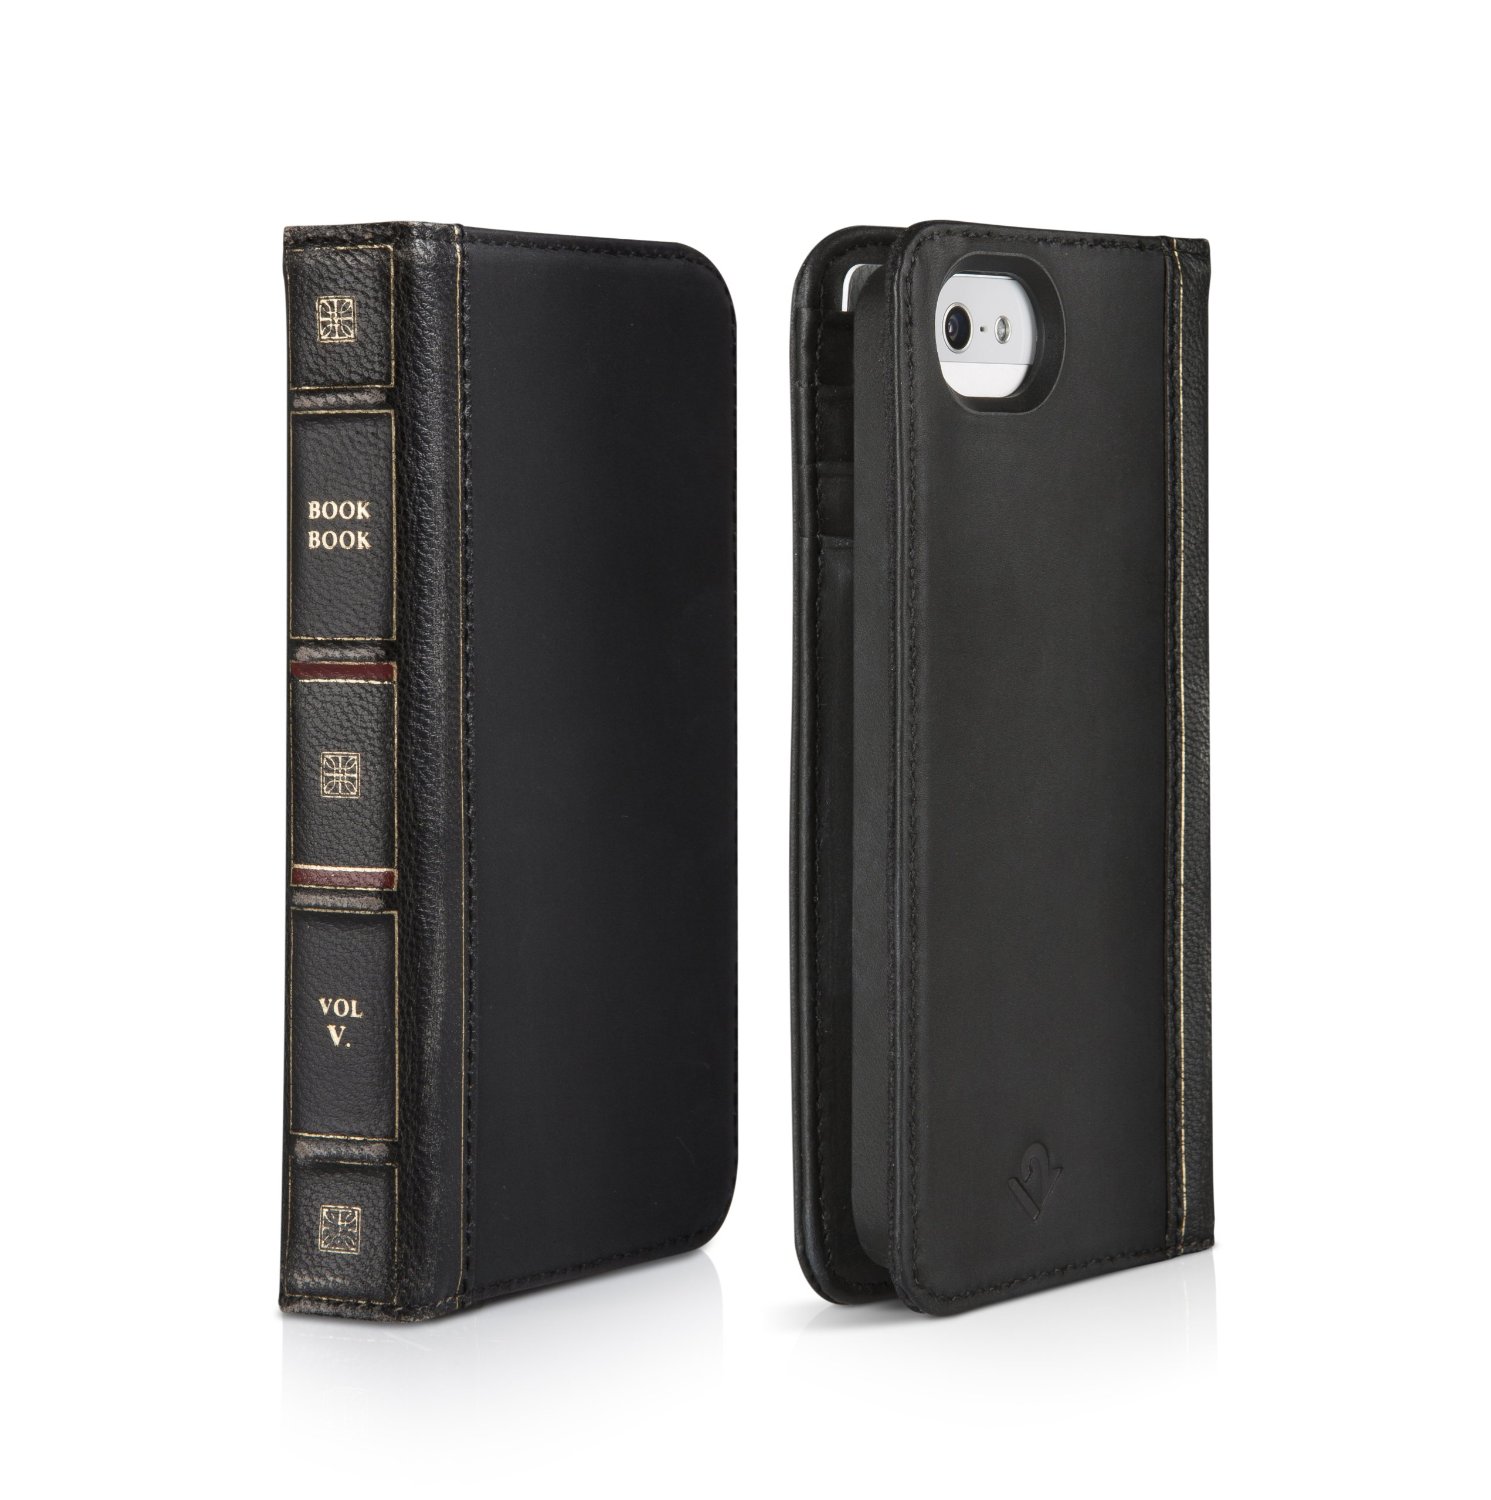 Twelve South BookBook for iPhone 5/5s , All-in-one leather iPhone case and wallet  $59.99